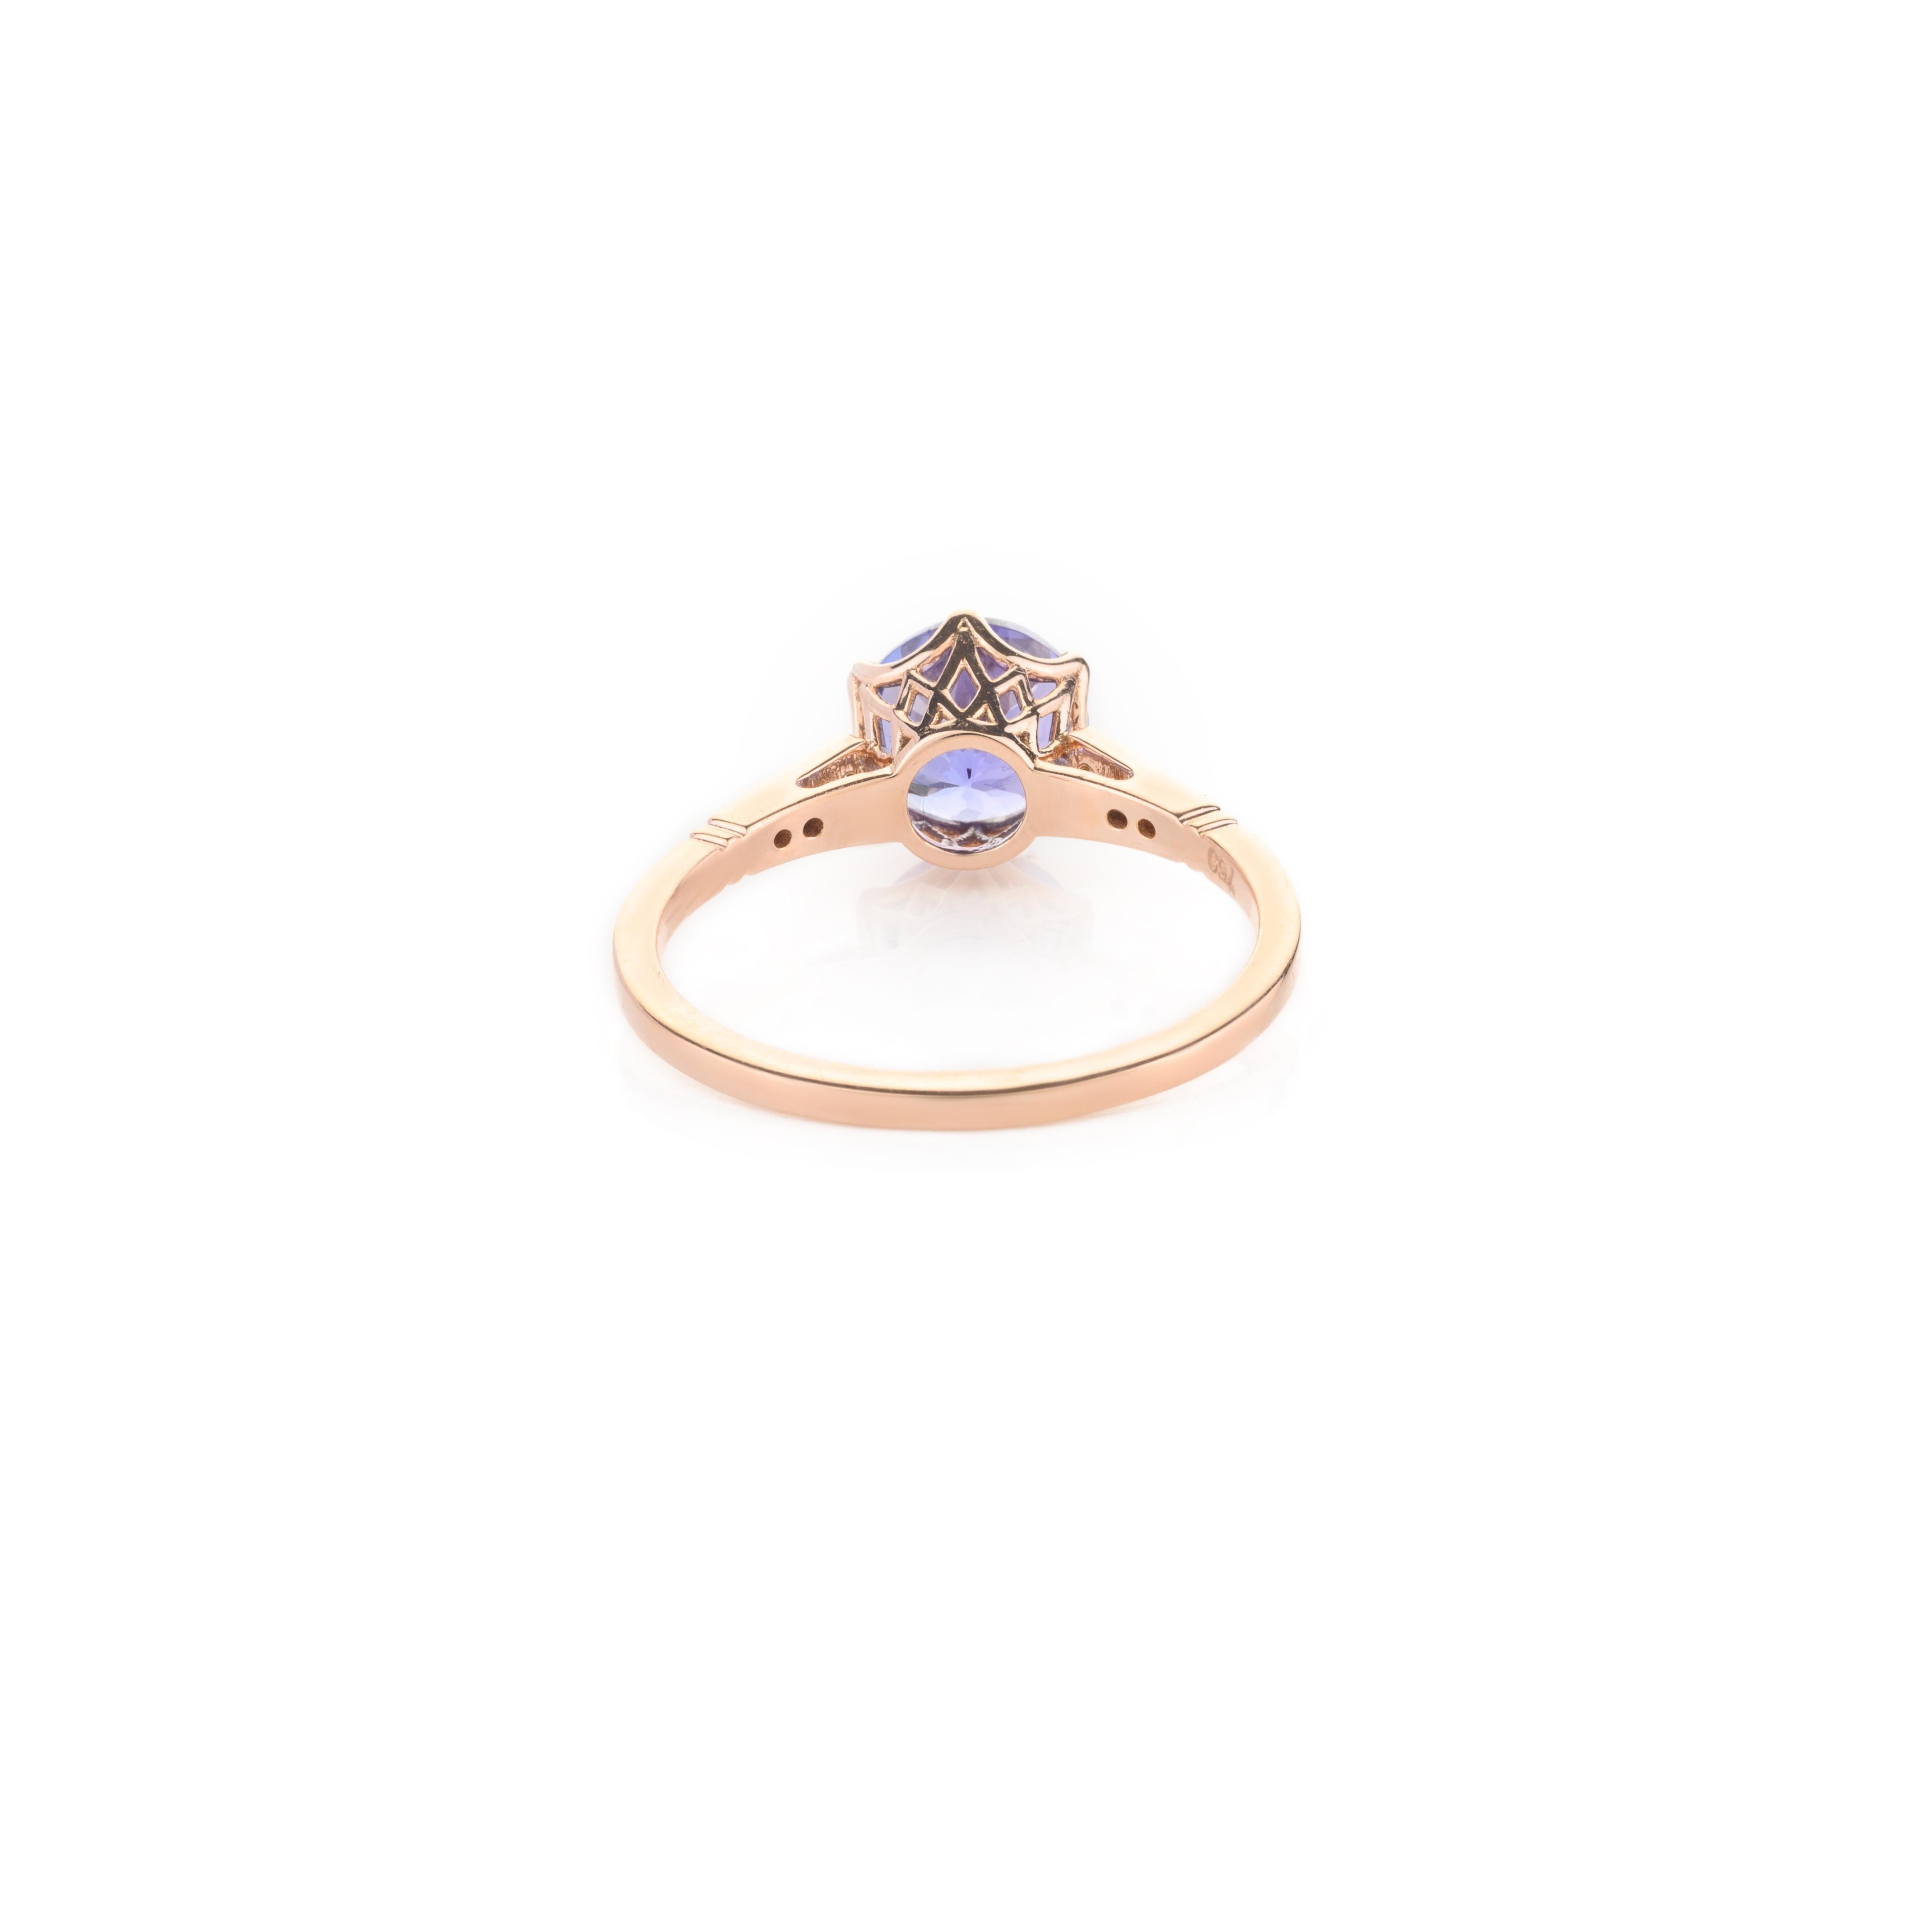 For Sale:  Genuine 1.68 Cts Tanzanite and Diamond Engagement Ring in 18k Solid Rose Gold 7